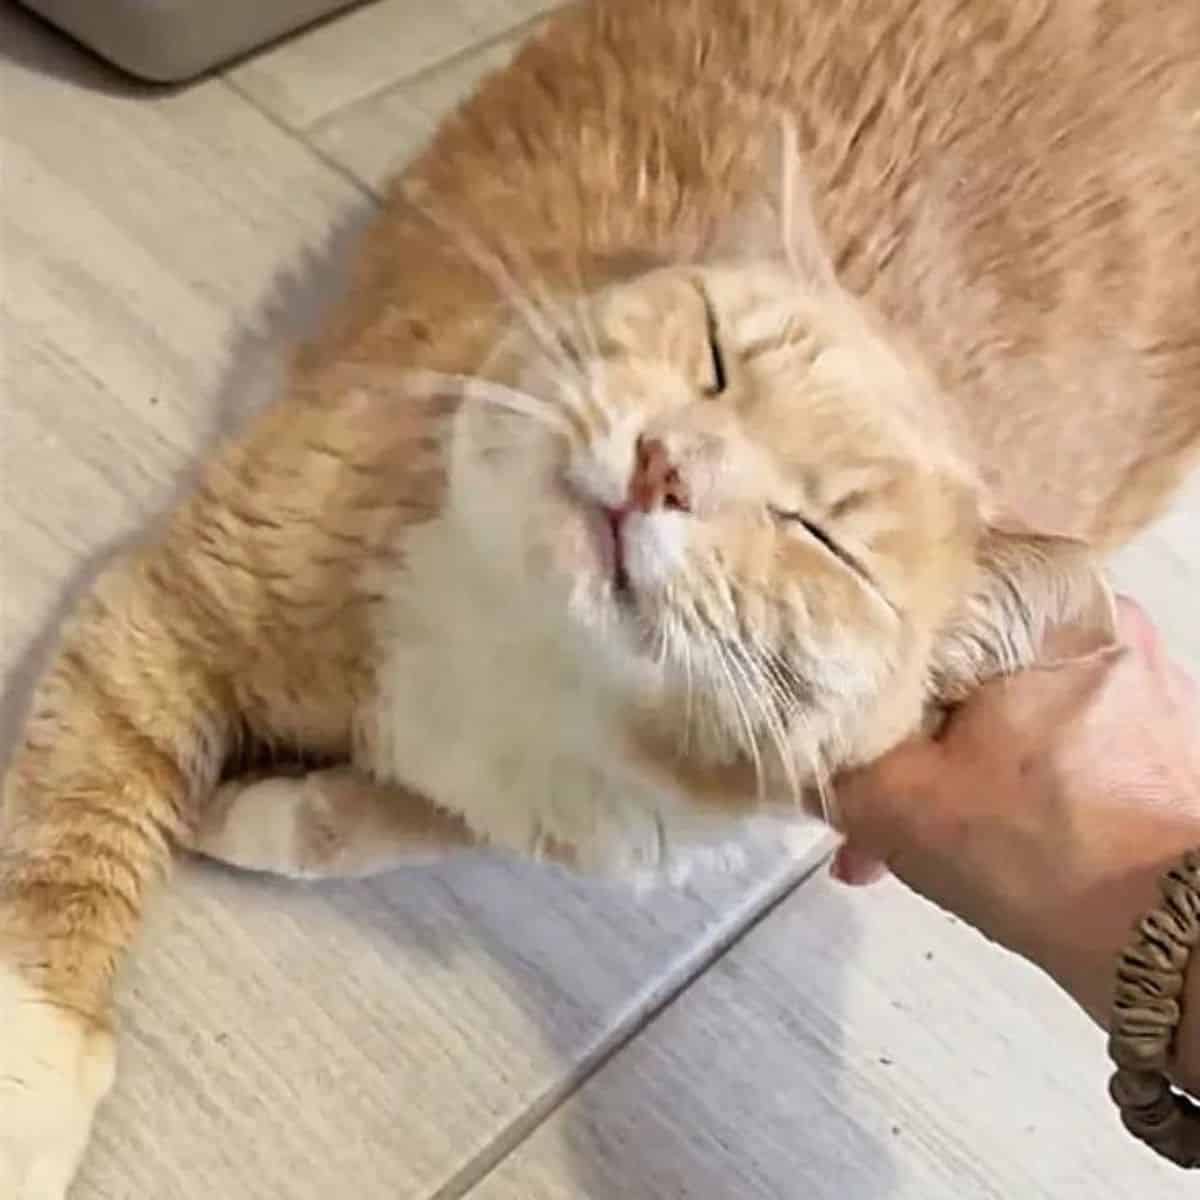 owner petting the cat